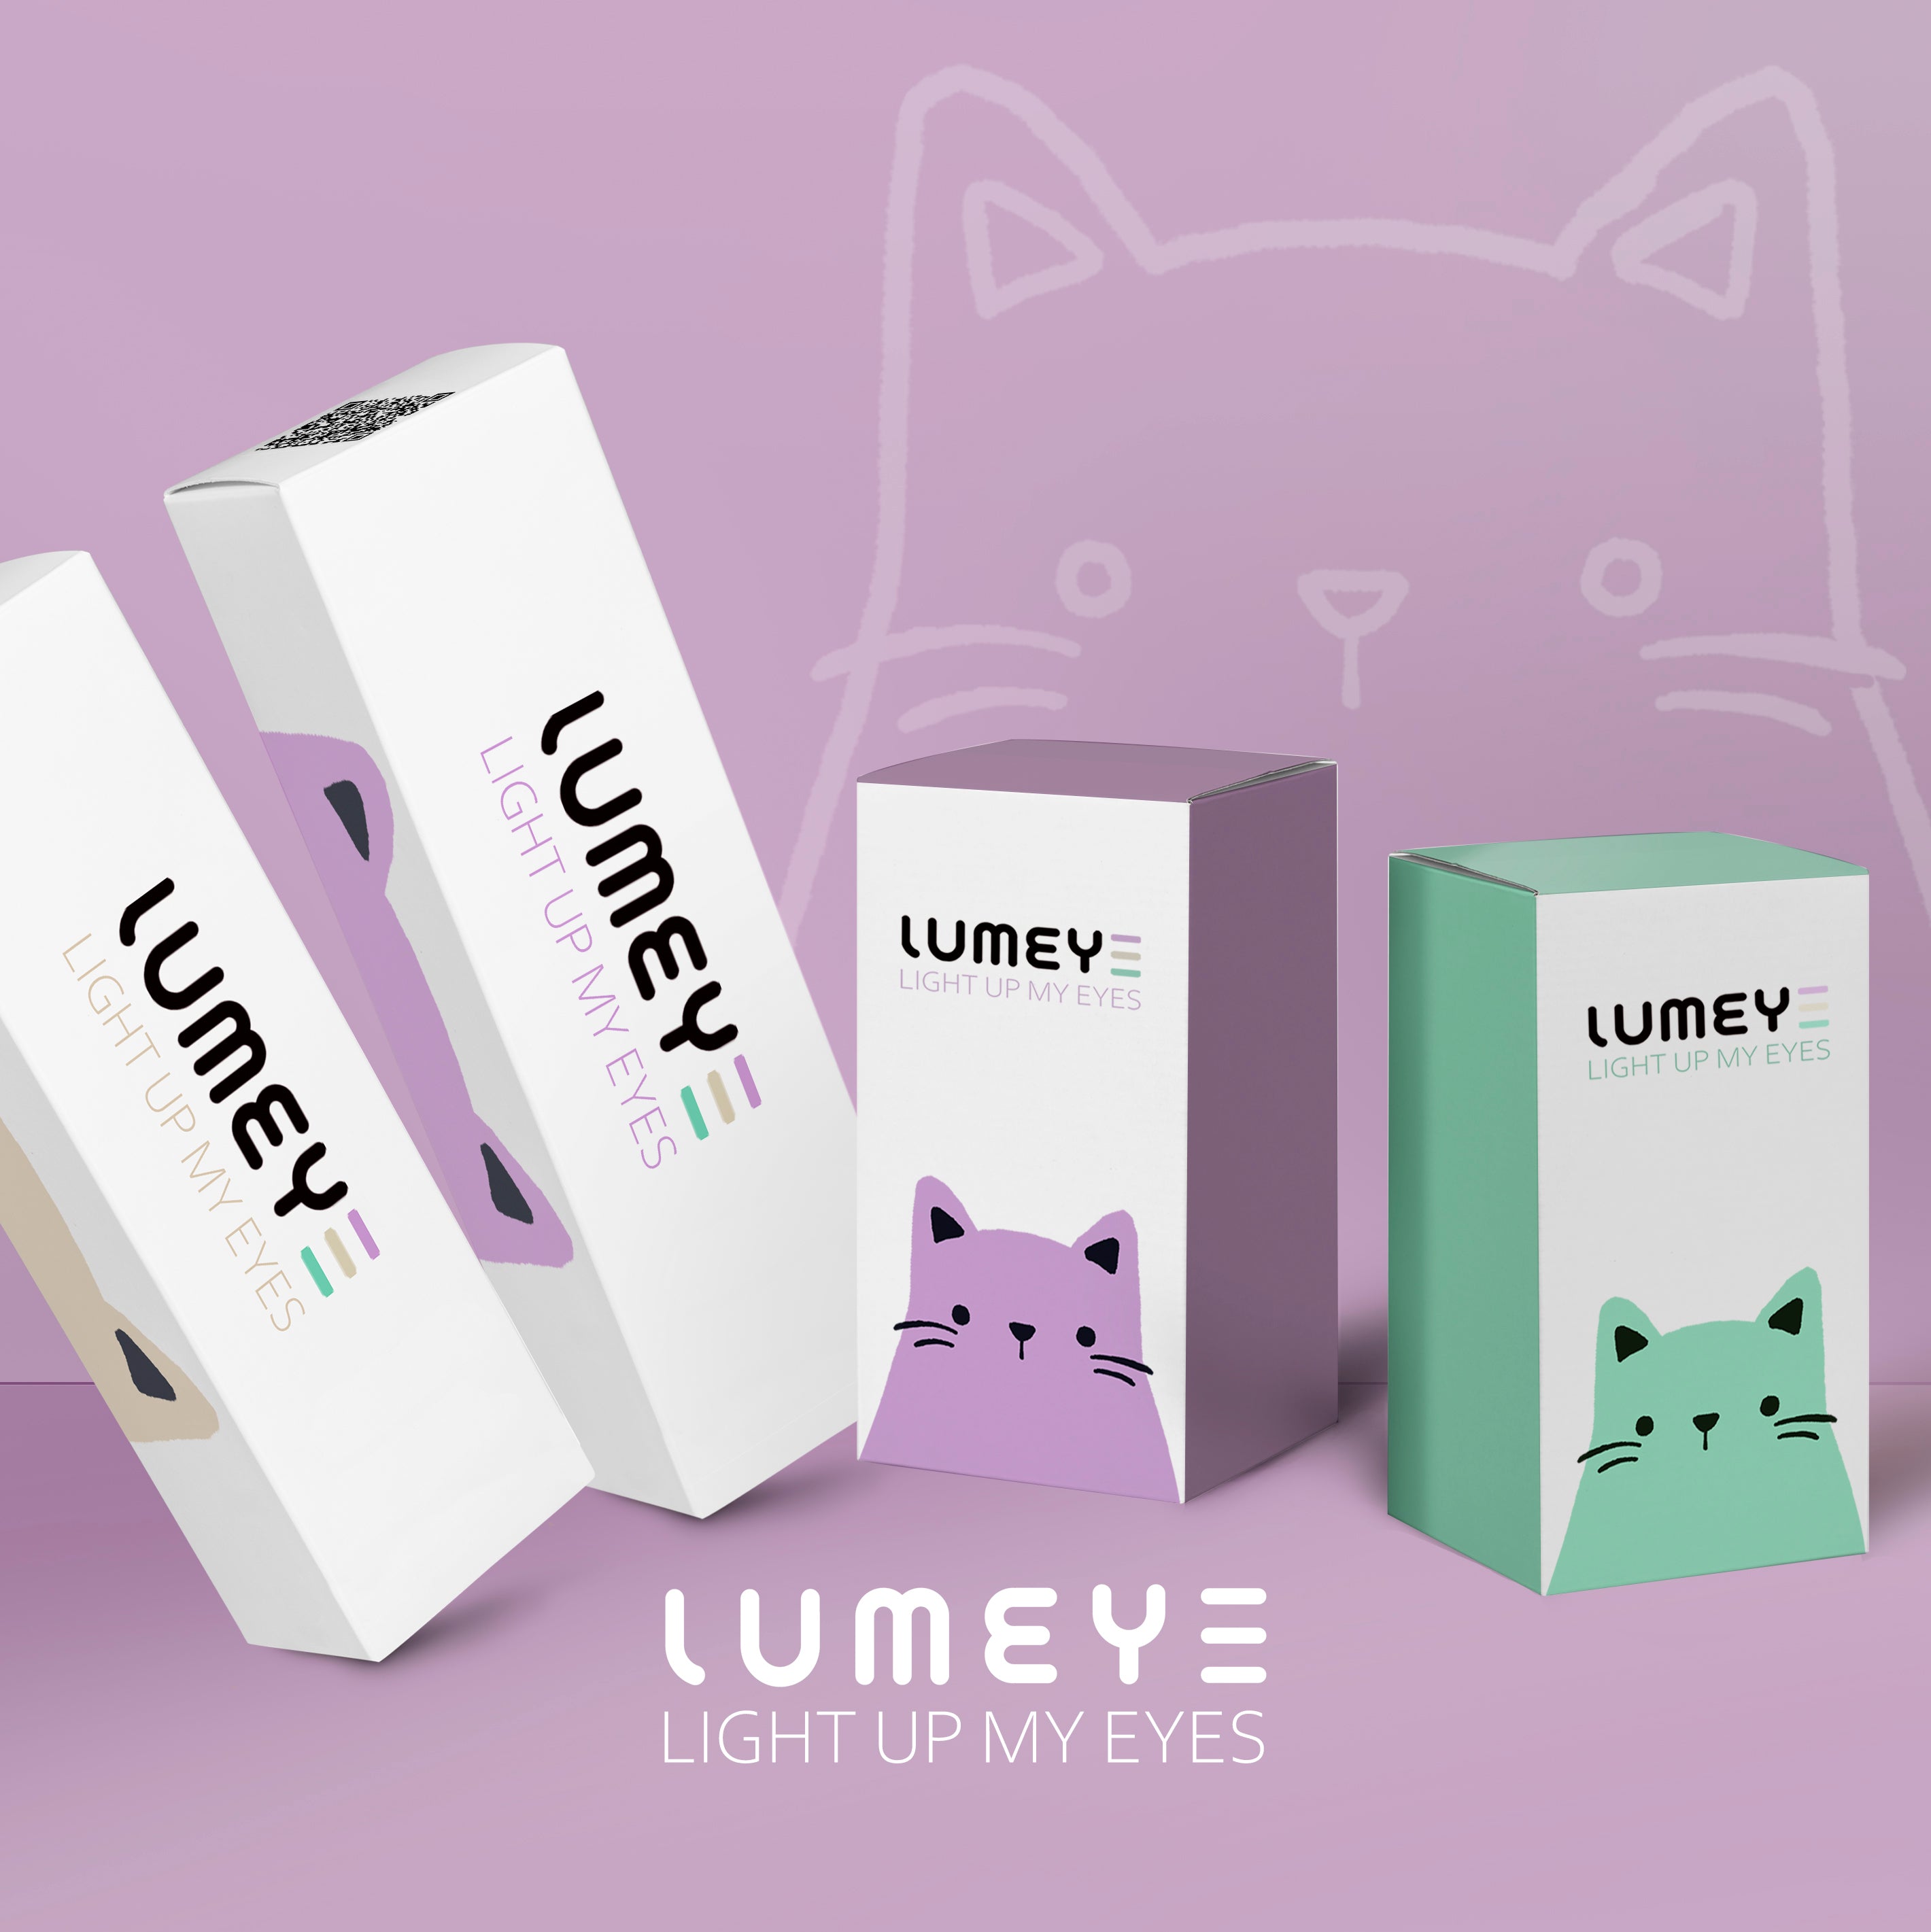 Best COLORED CONTACTS - LUMEYE Blind Black Colored Contact Lenses - LUMEYE